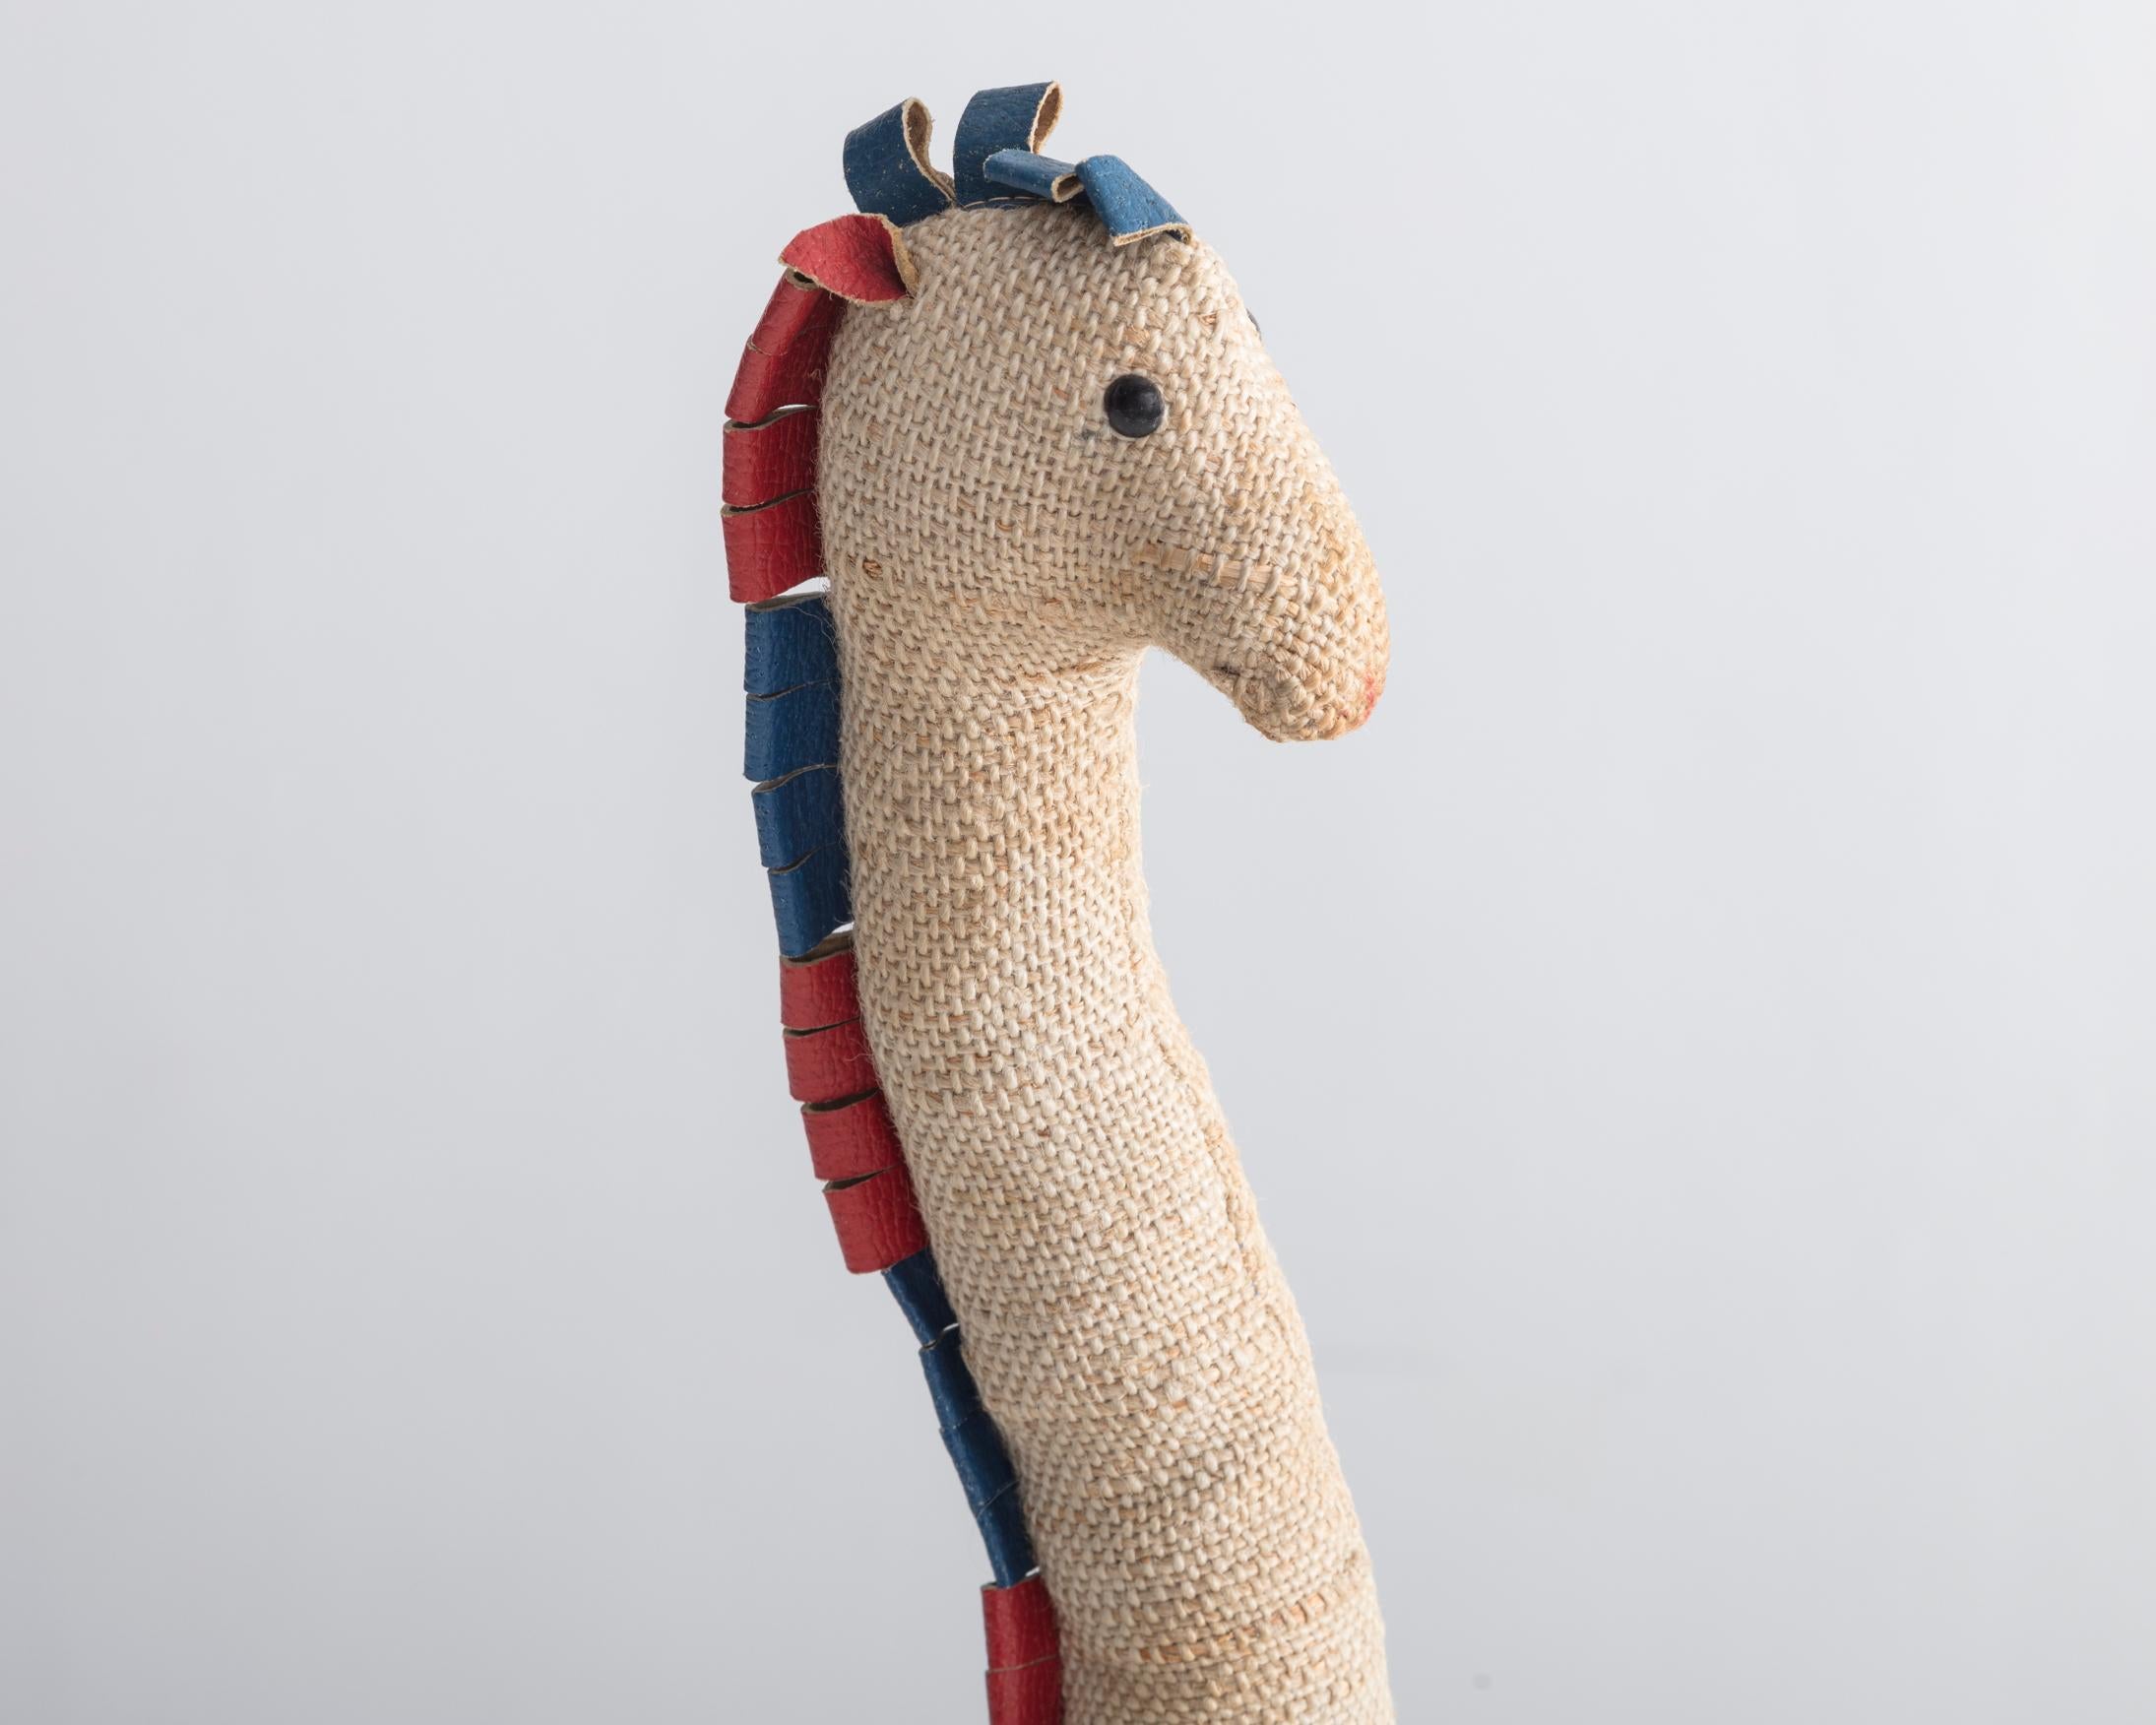 German Therapeutic Giraffe Toy in Jute and Leather by Renate Müller, circa 1968 For Sale